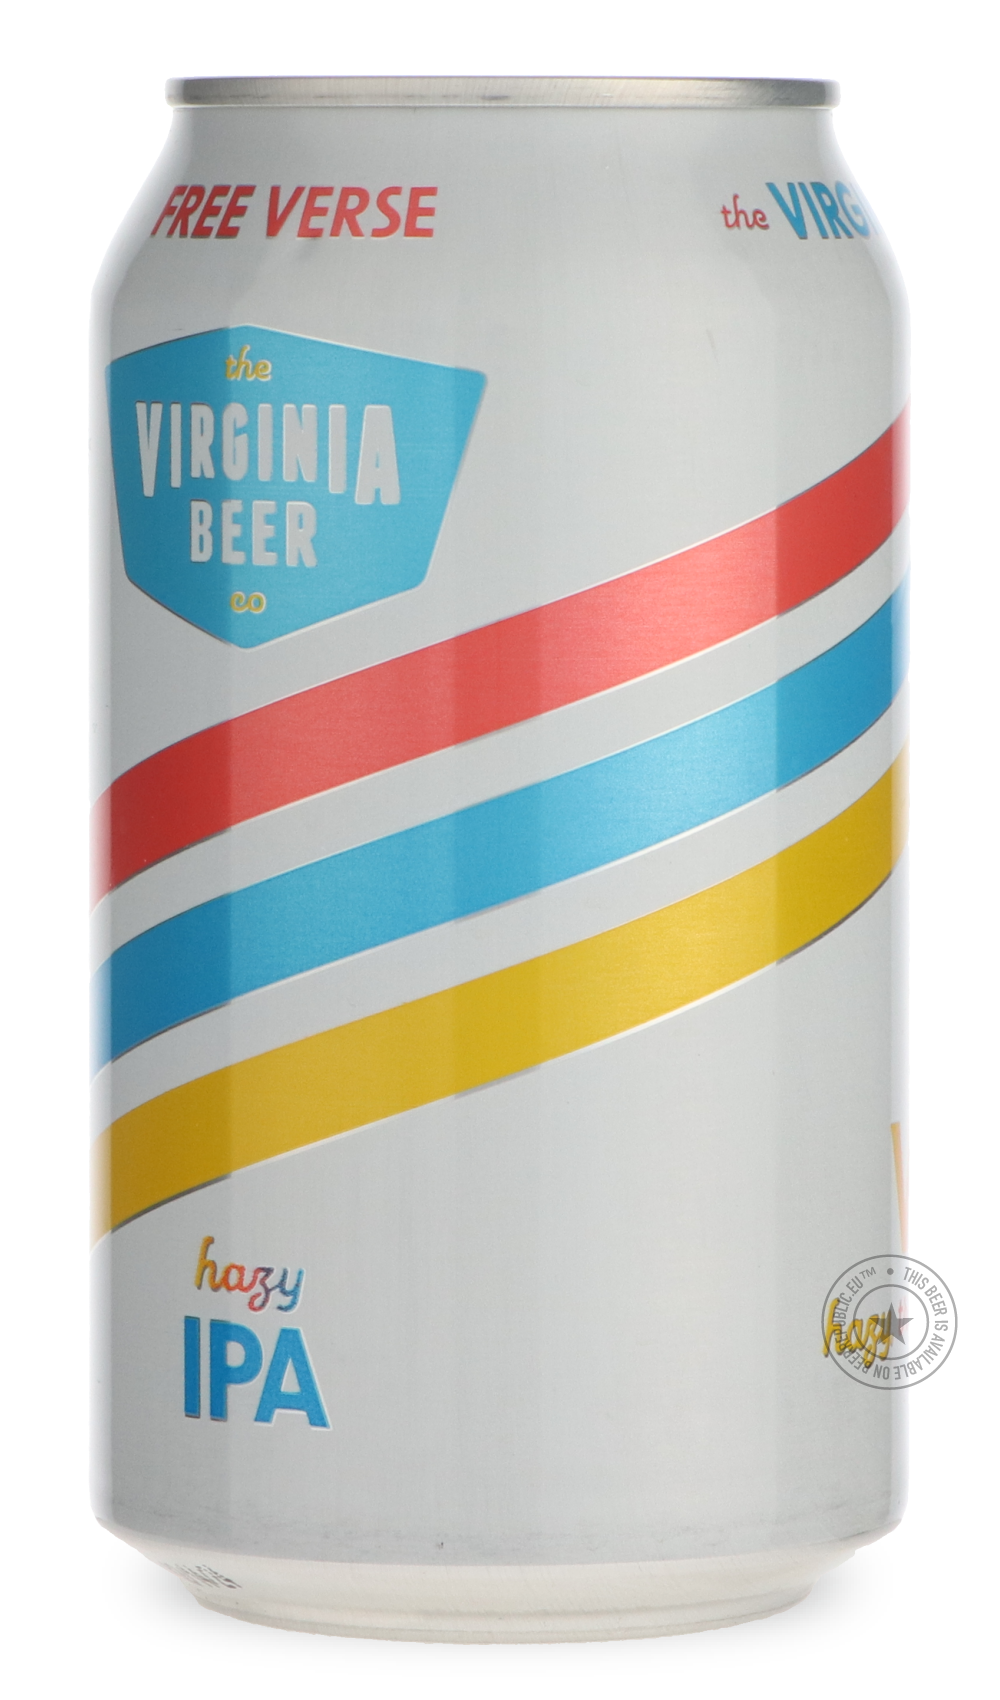 -The Virginia Beer Company- Free Verse-IPA- Only @ Beer Republic - The best online beer store for American & Canadian craft beer - Buy beer online from the USA and Canada - Bier online kopen - Amerikaans bier kopen - Craft beer store - Craft beer kopen - Amerikanisch bier kaufen - Bier online kaufen - Acheter biere online - IPA - Stout - Porter - New England IPA - Hazy IPA - Imperial Stout - Barrel Aged - Barrel Aged Imperial Stout - Brown - Dark beer - Blond - Blonde - Pilsner - Lager - Wheat - Weizen - Am